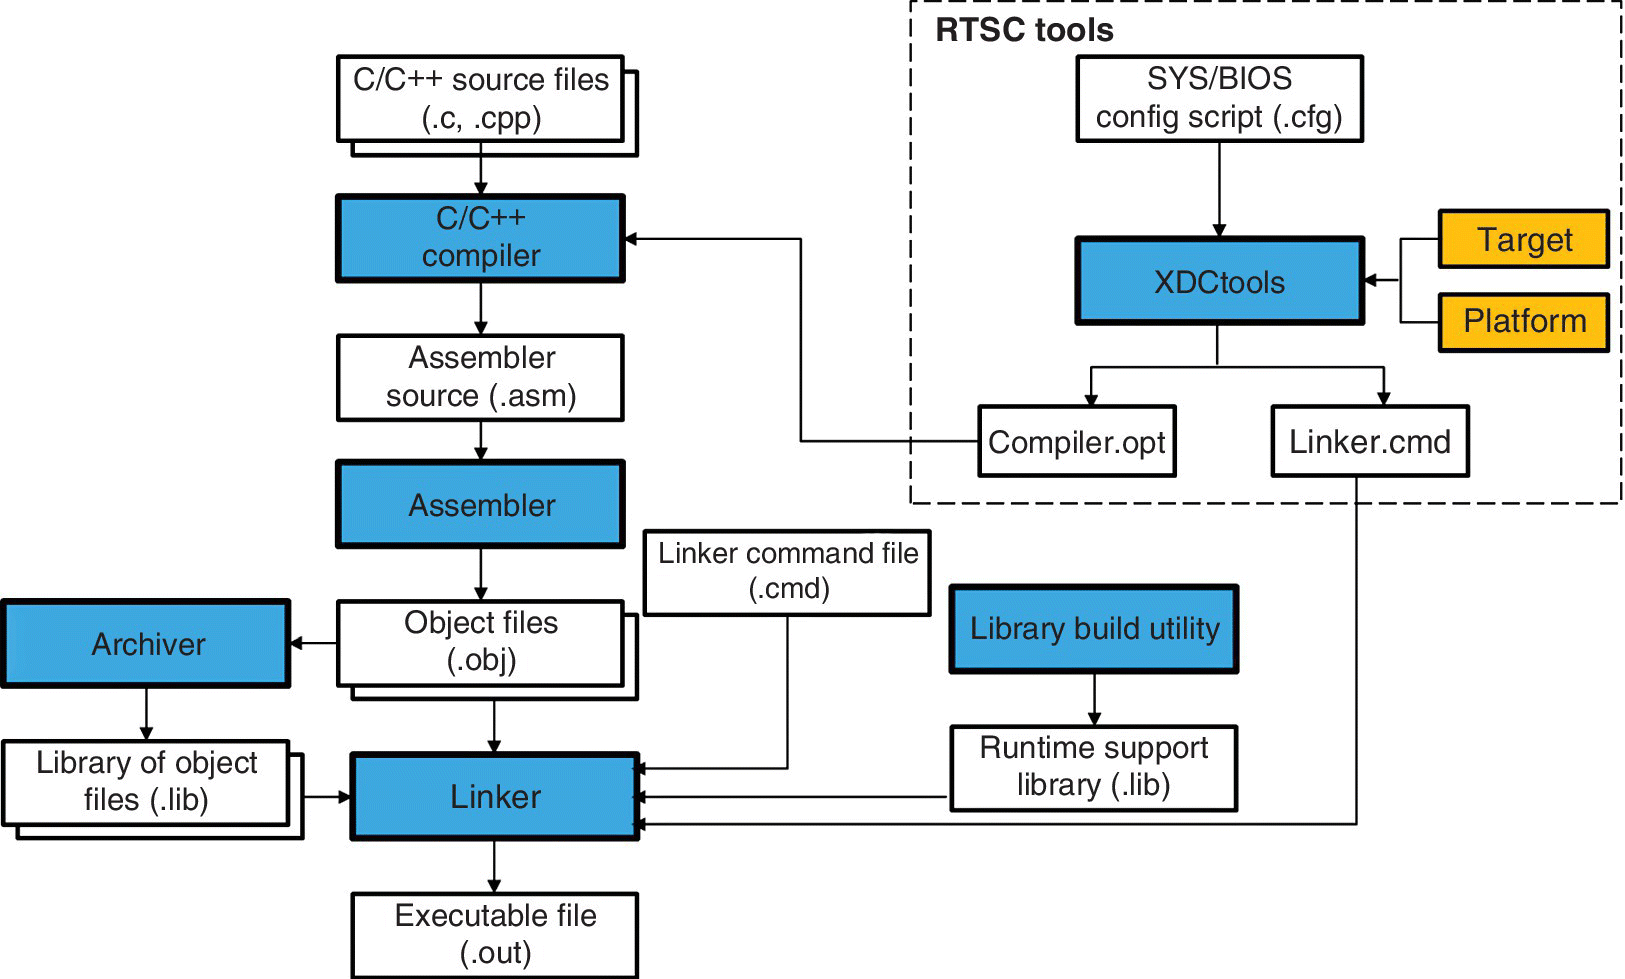 Flow chart illustrating the RTSC tools starting from C/C++ source files to C/C++ compiler, to assembler source, to assembler, to object files, to archiver, library of object, to linker, ending to executable file.